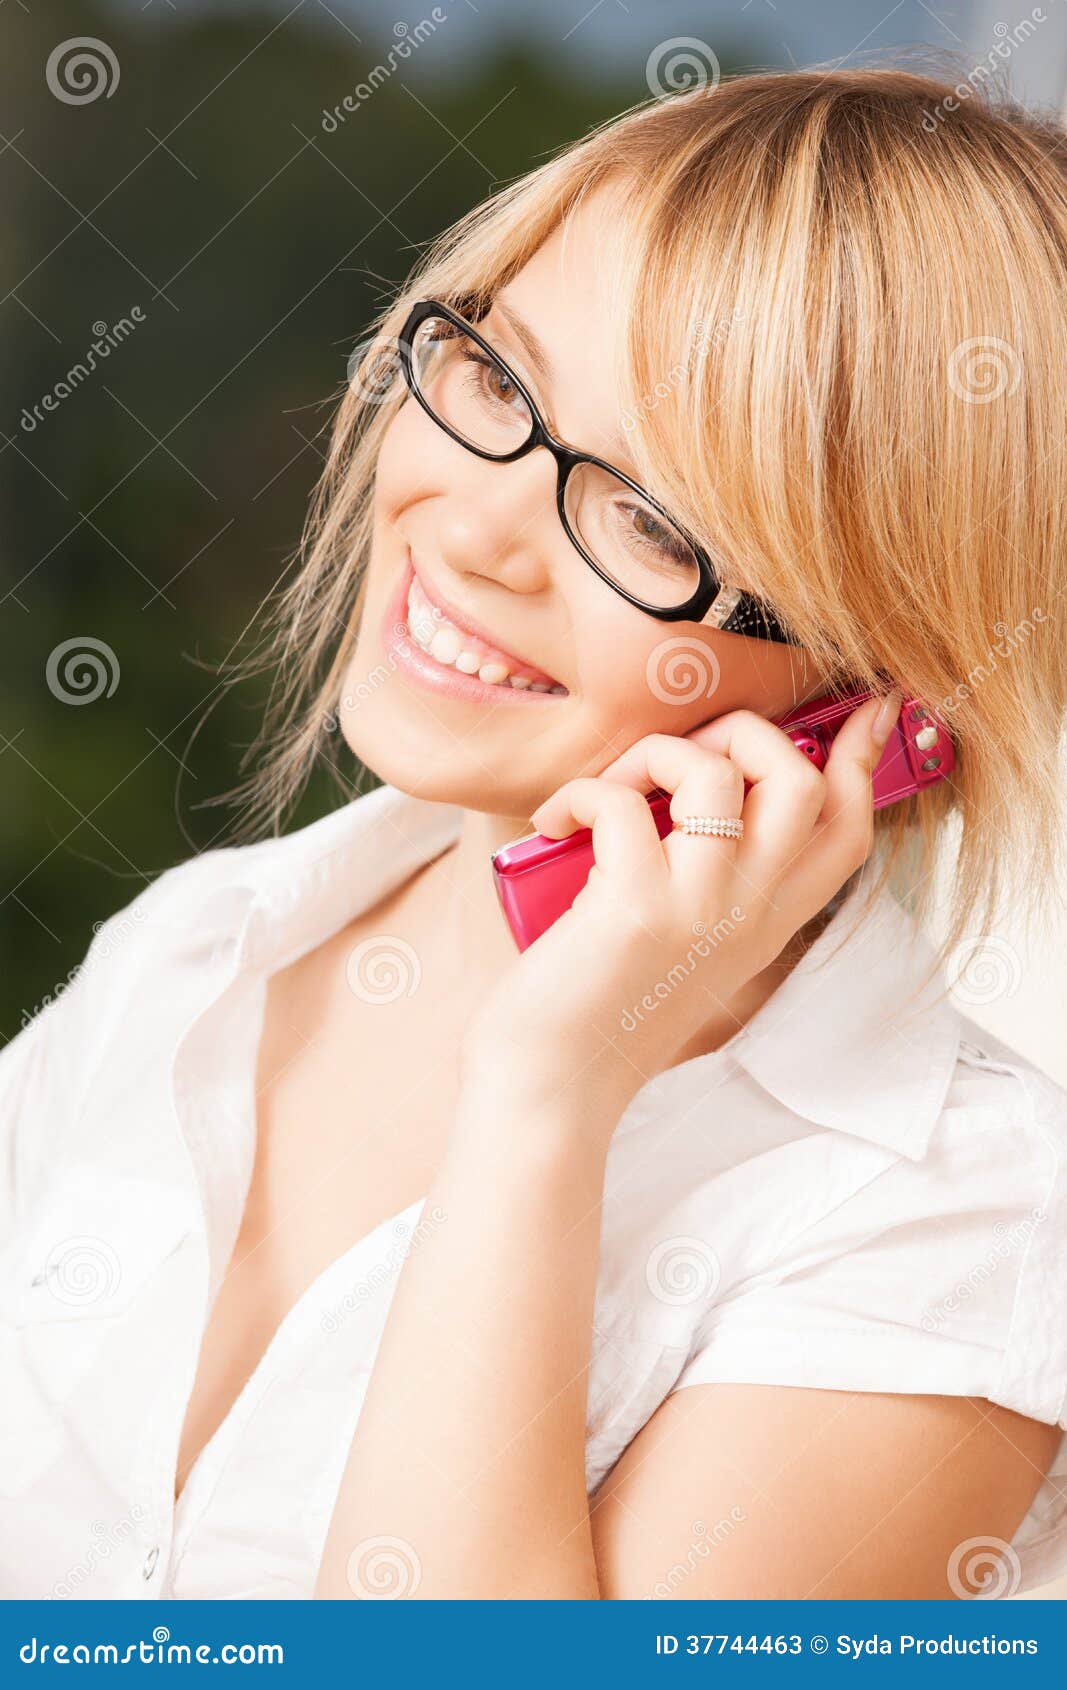 girl cell phone Young teen